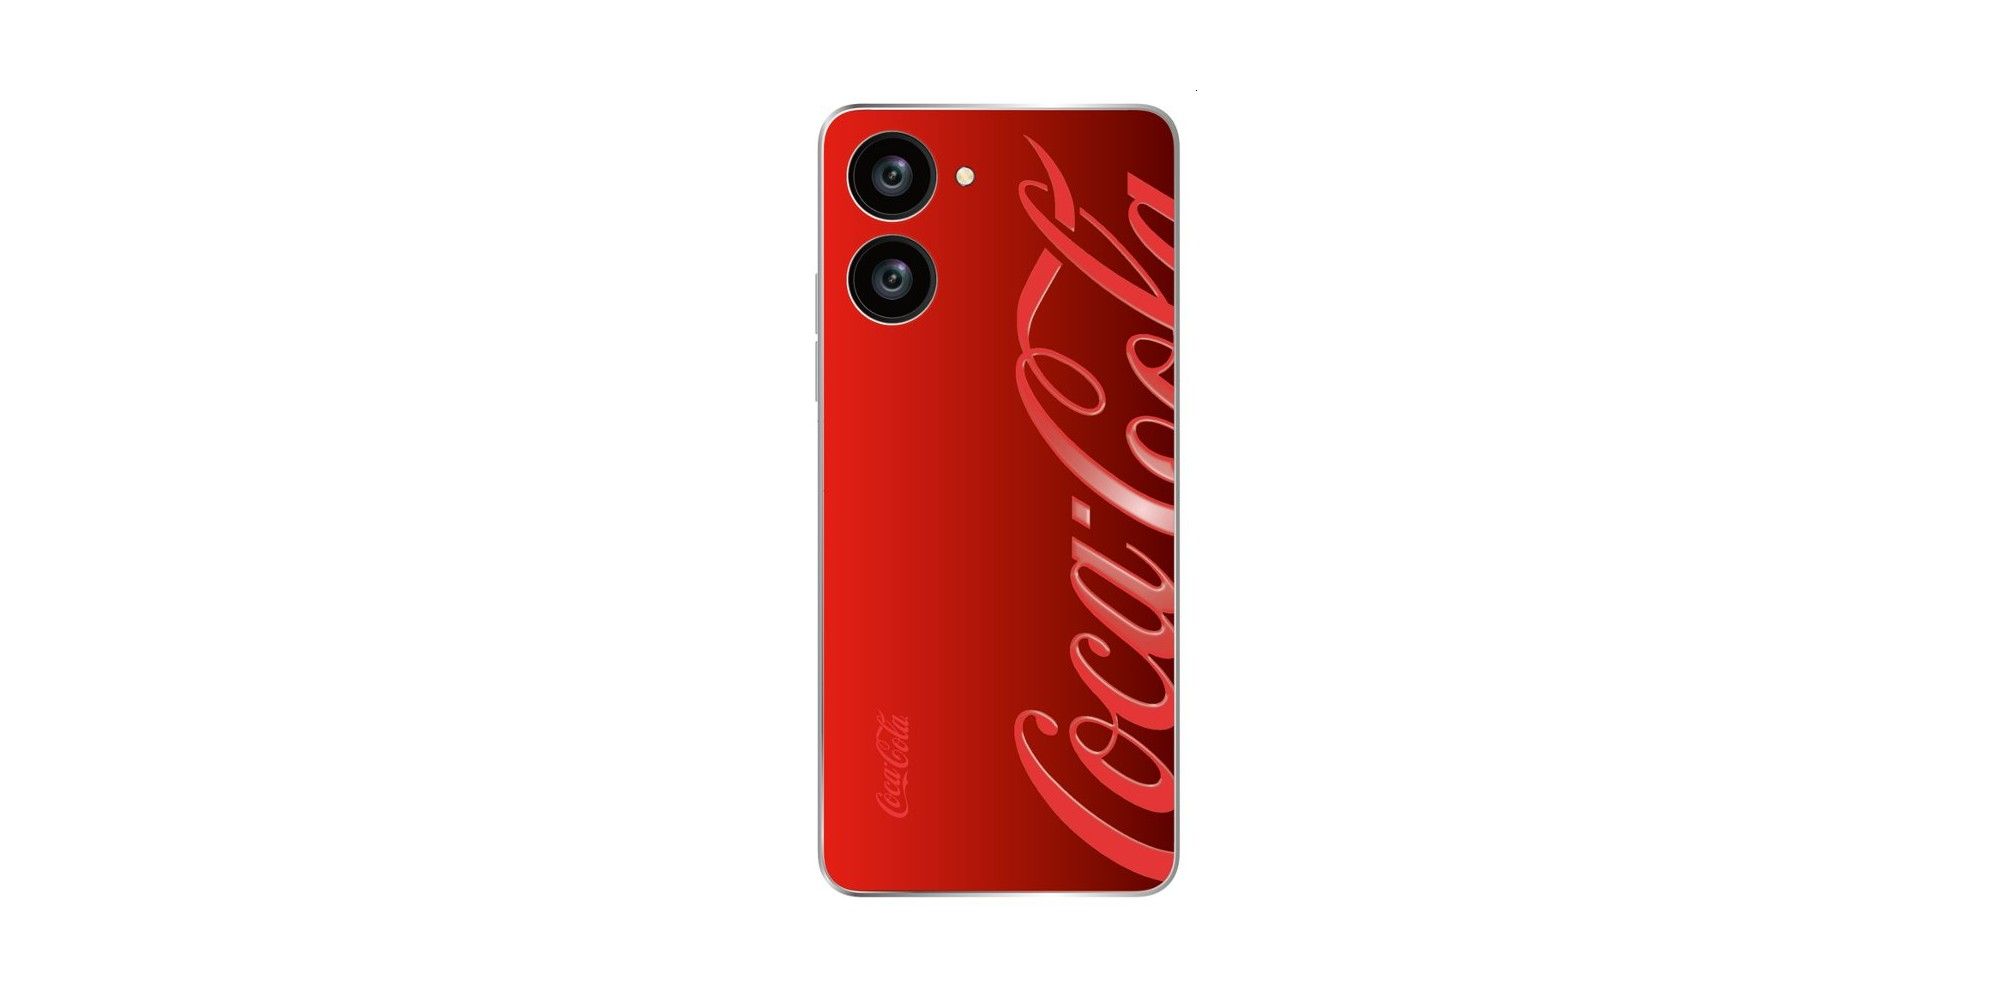 An image showing the back of the alleged Coca-cola CocaPhone